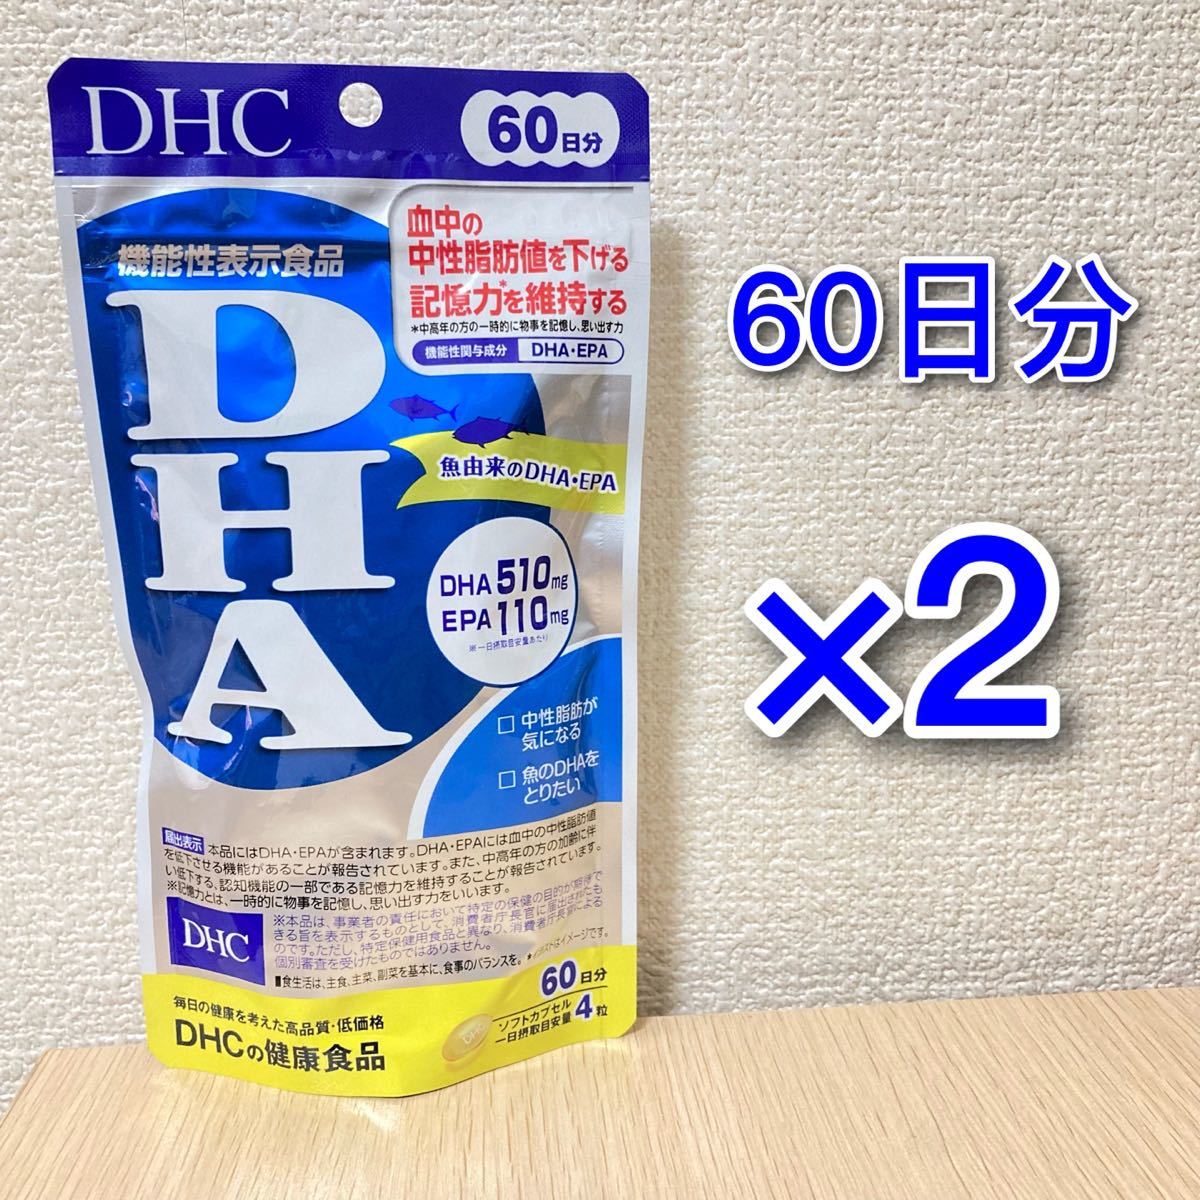 DHC DHA 60日分 240粒 3袋セット 通販